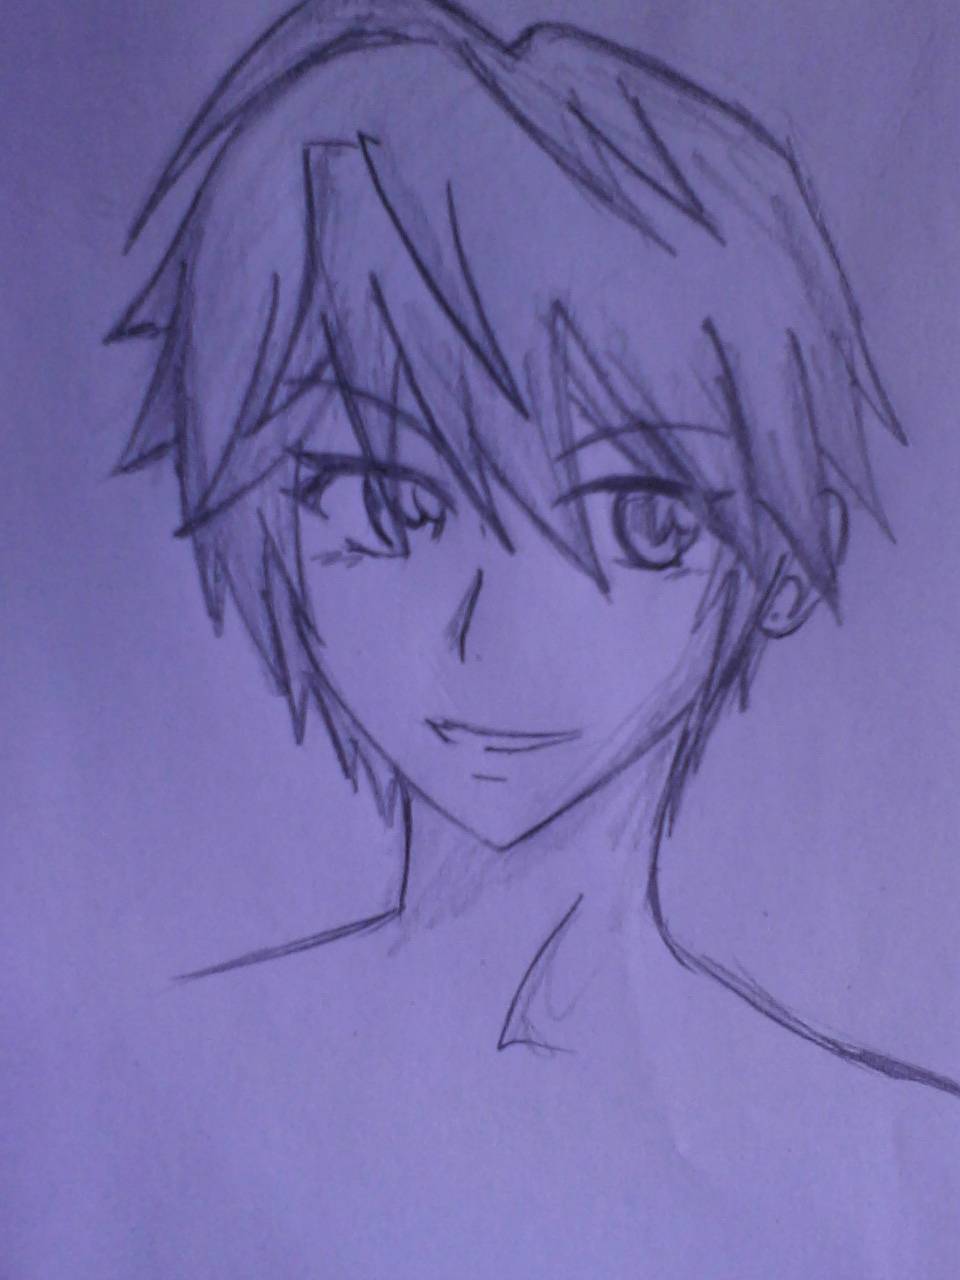 Anime Things To Draw When Bored "Hmmmm...please guys